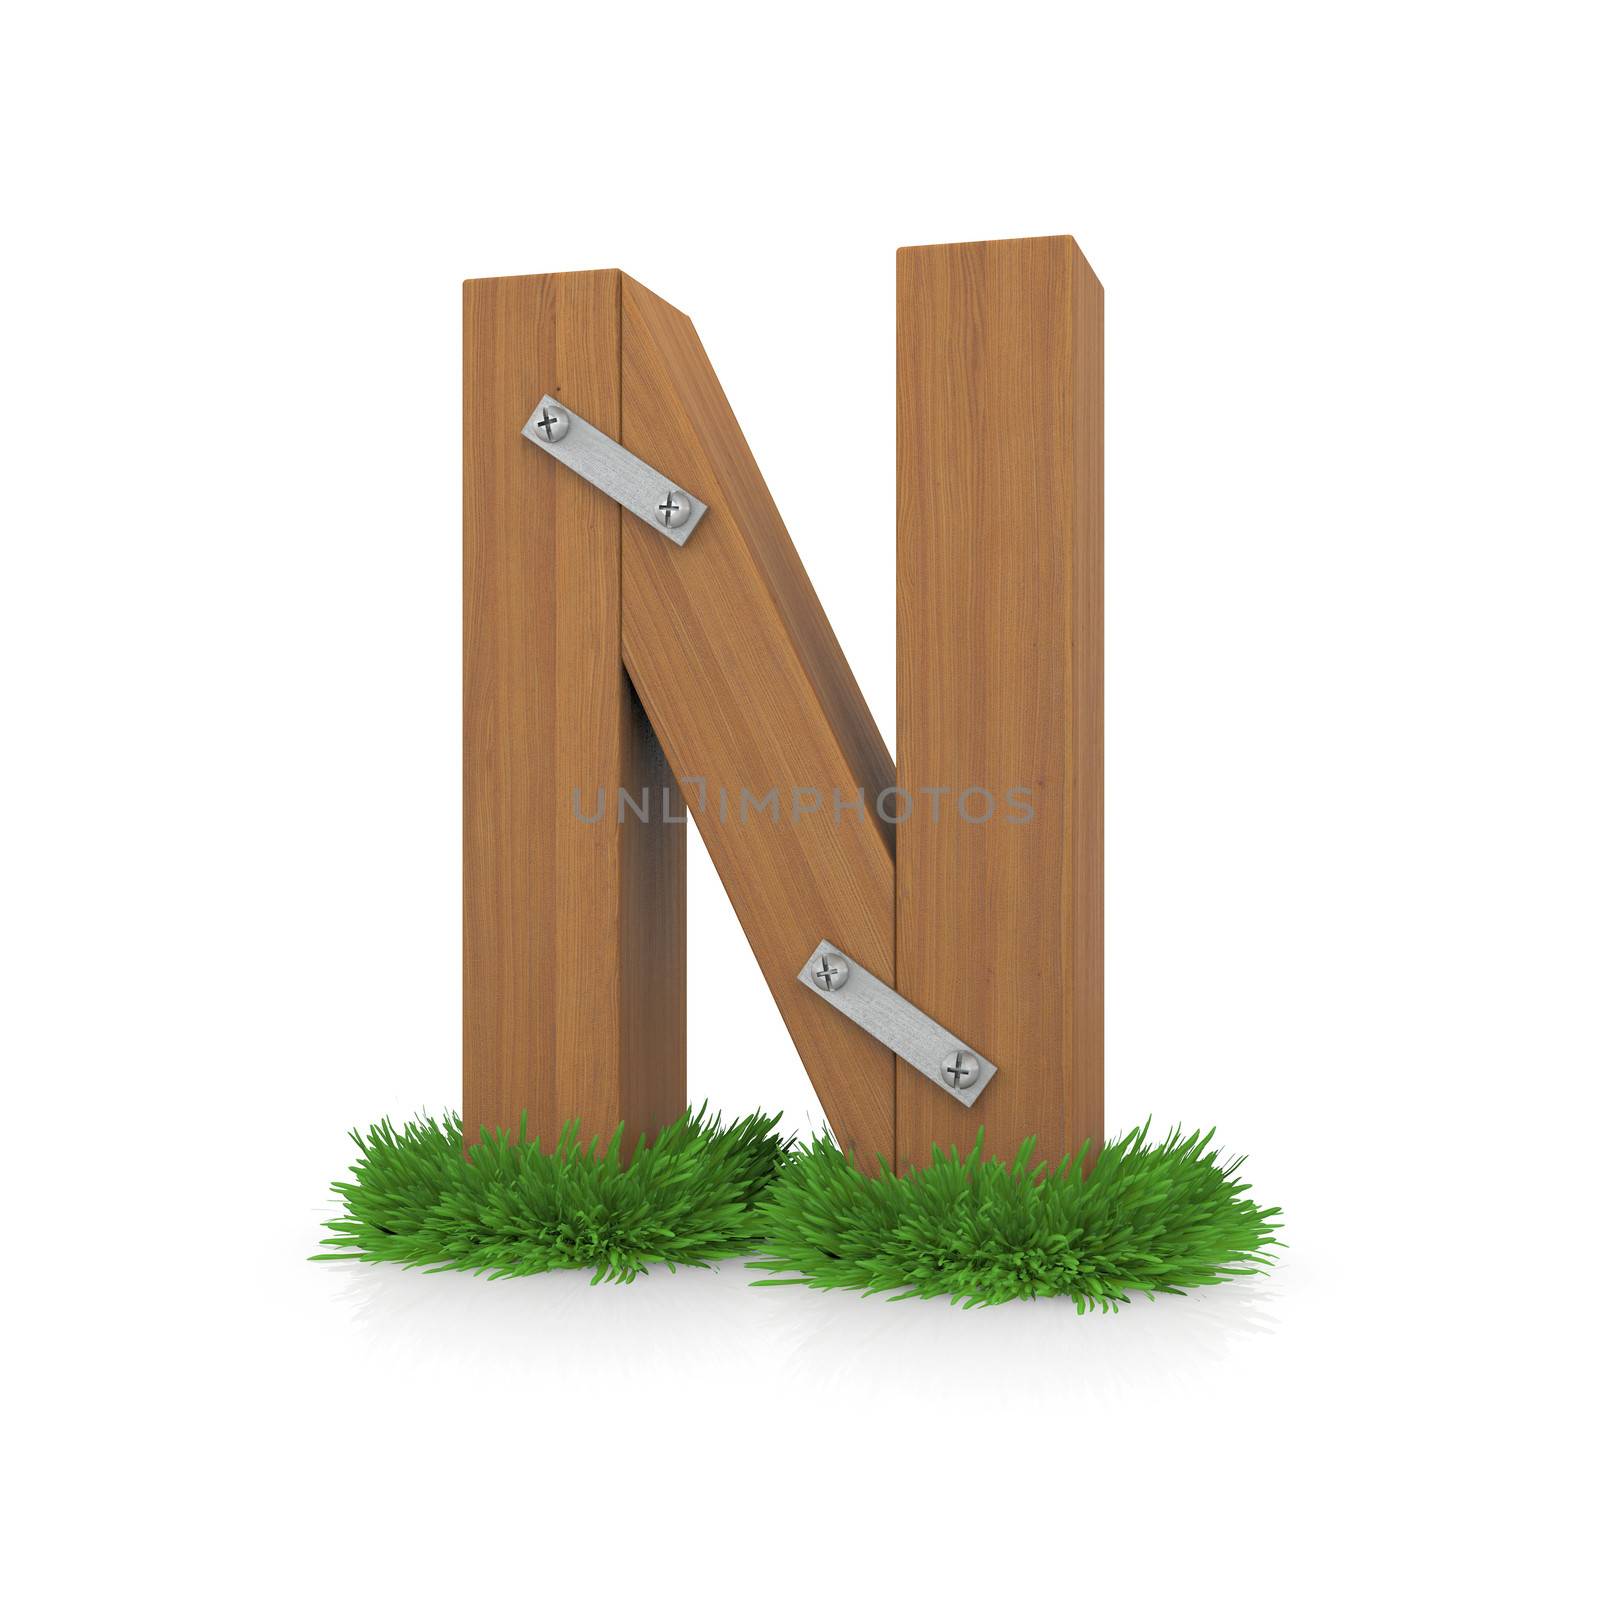 Wooden letter N in the grass. Isolated render with reflection on white background. bio concept